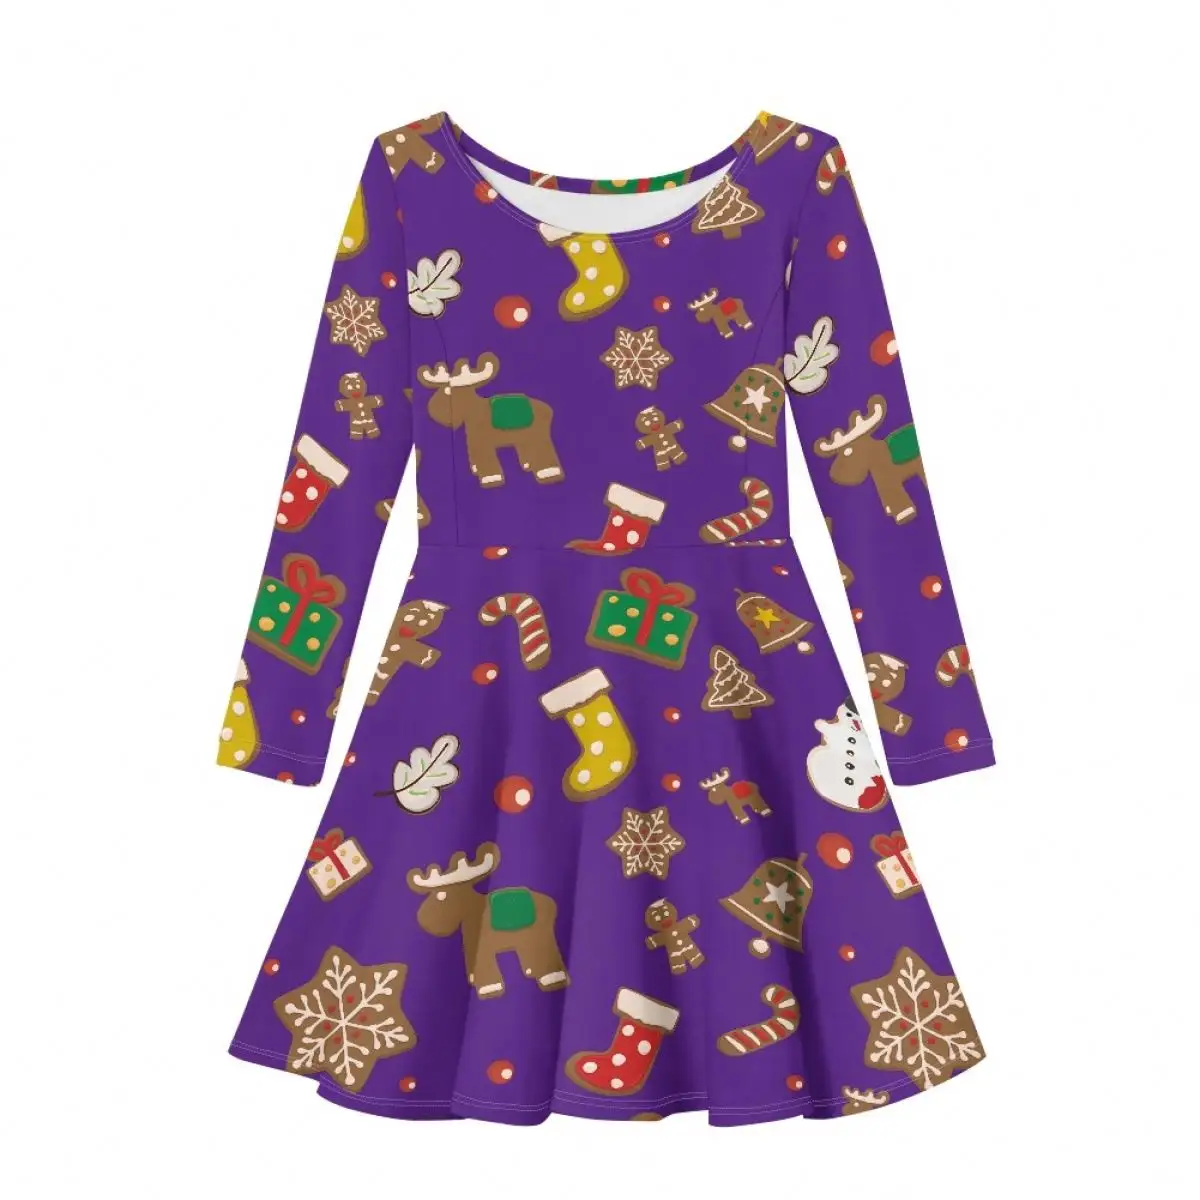 Wholesale Winter Casual Dresses for Girls Kids Children Clothes Long Sleeve Purple Pattern Outwear Clothing Baby Christmas